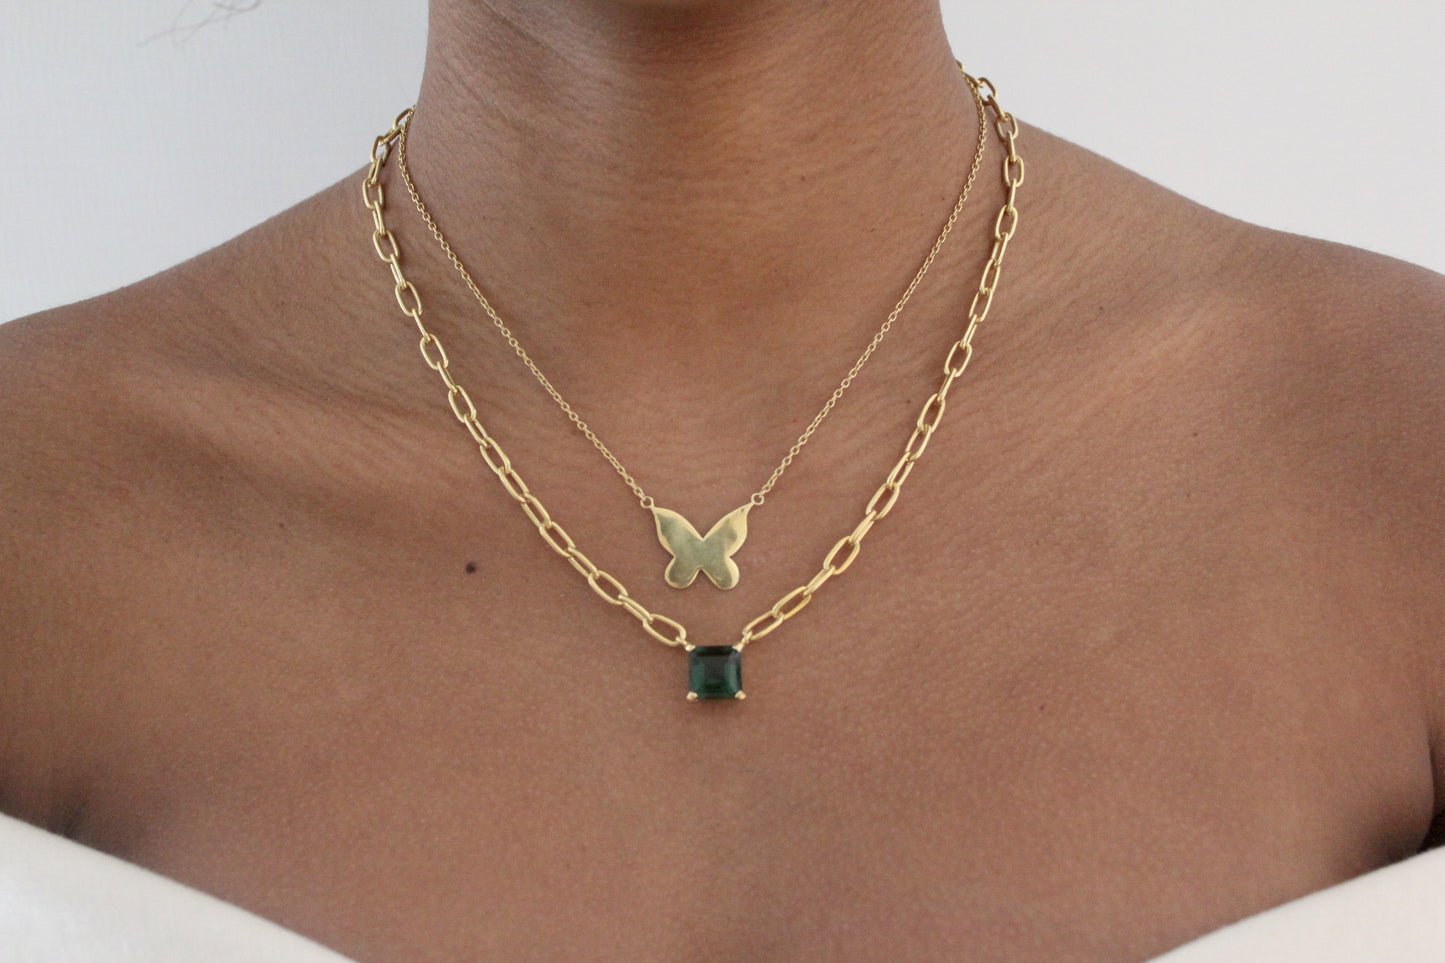 The Green Quartz Link Necklace - you by me.